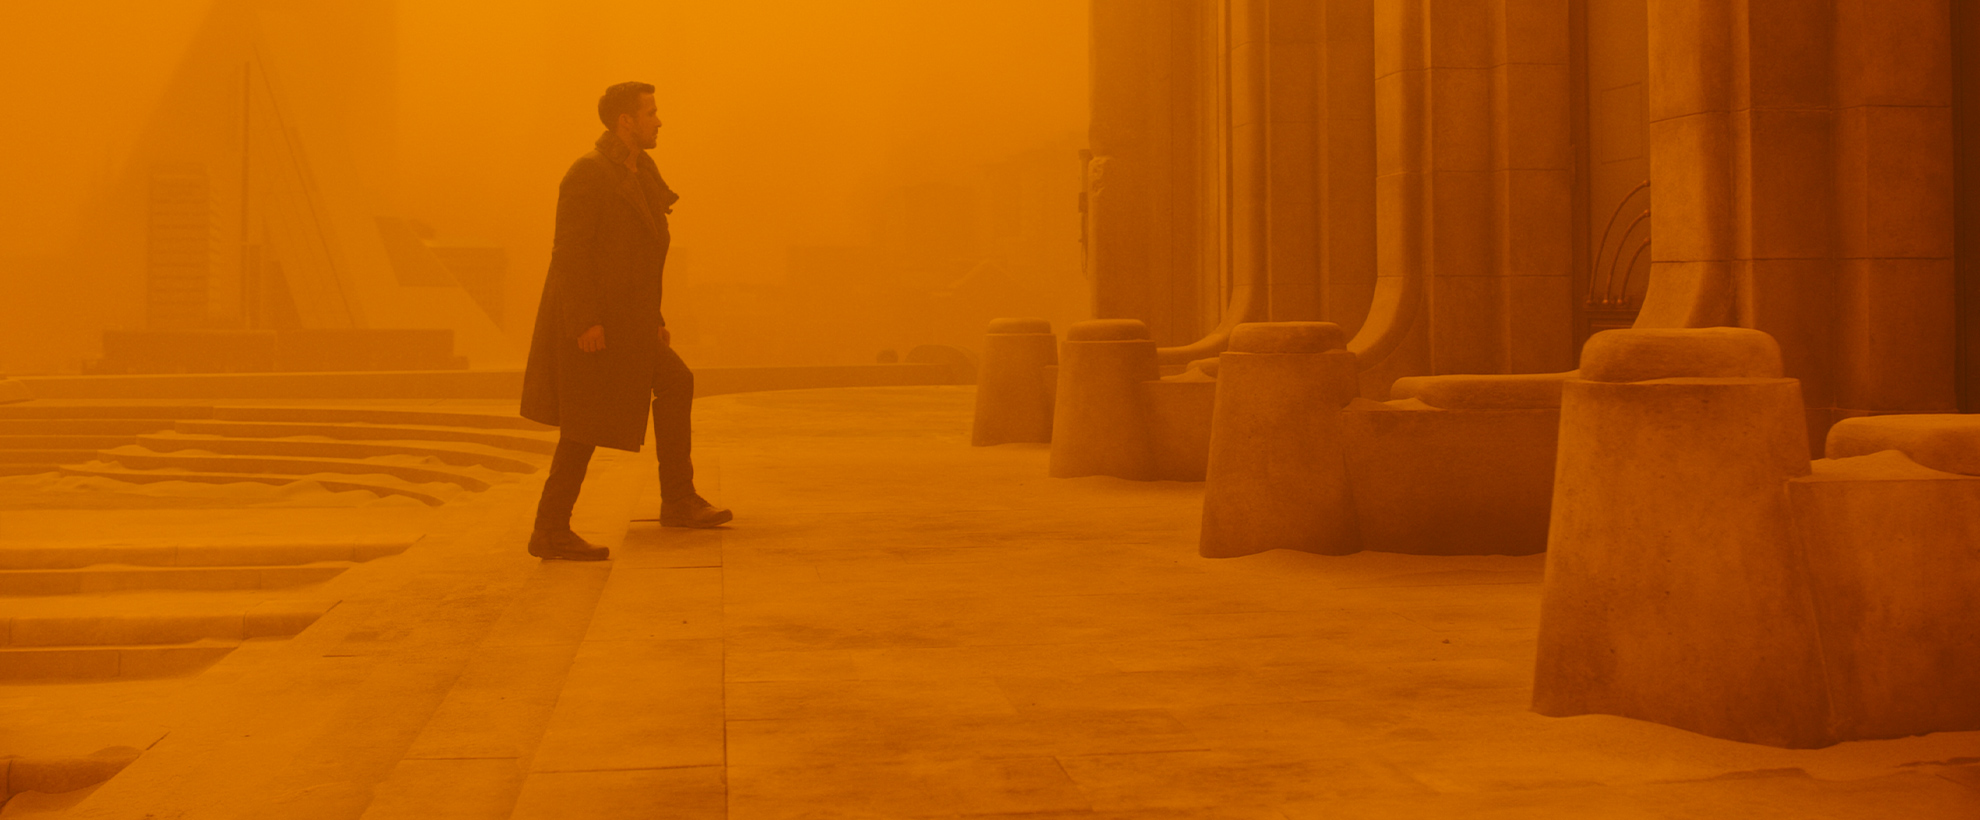 Ryan Gosling walks up steps towards stone pillars, the whole image is saturated in orange tones